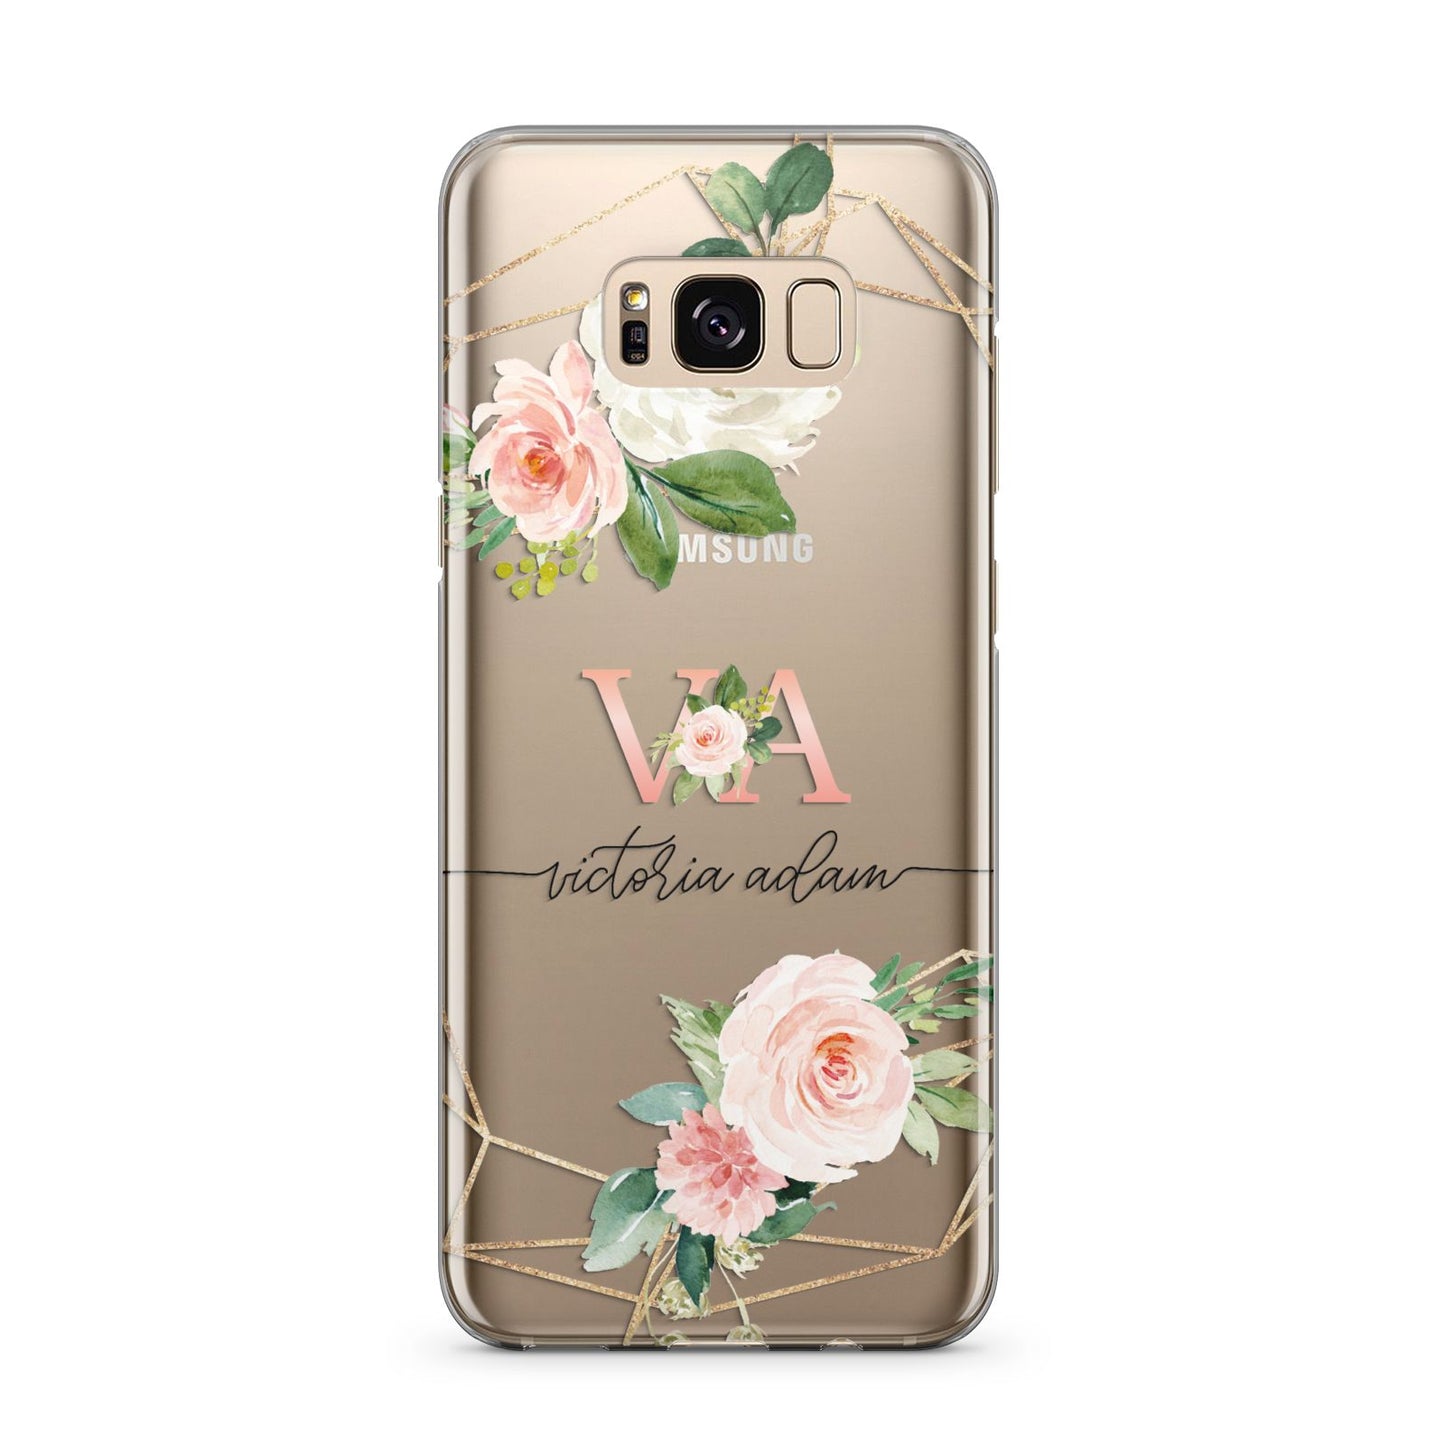 Blush Pink Rose Floral Personalised Samsung Galaxy S8 Plus Case